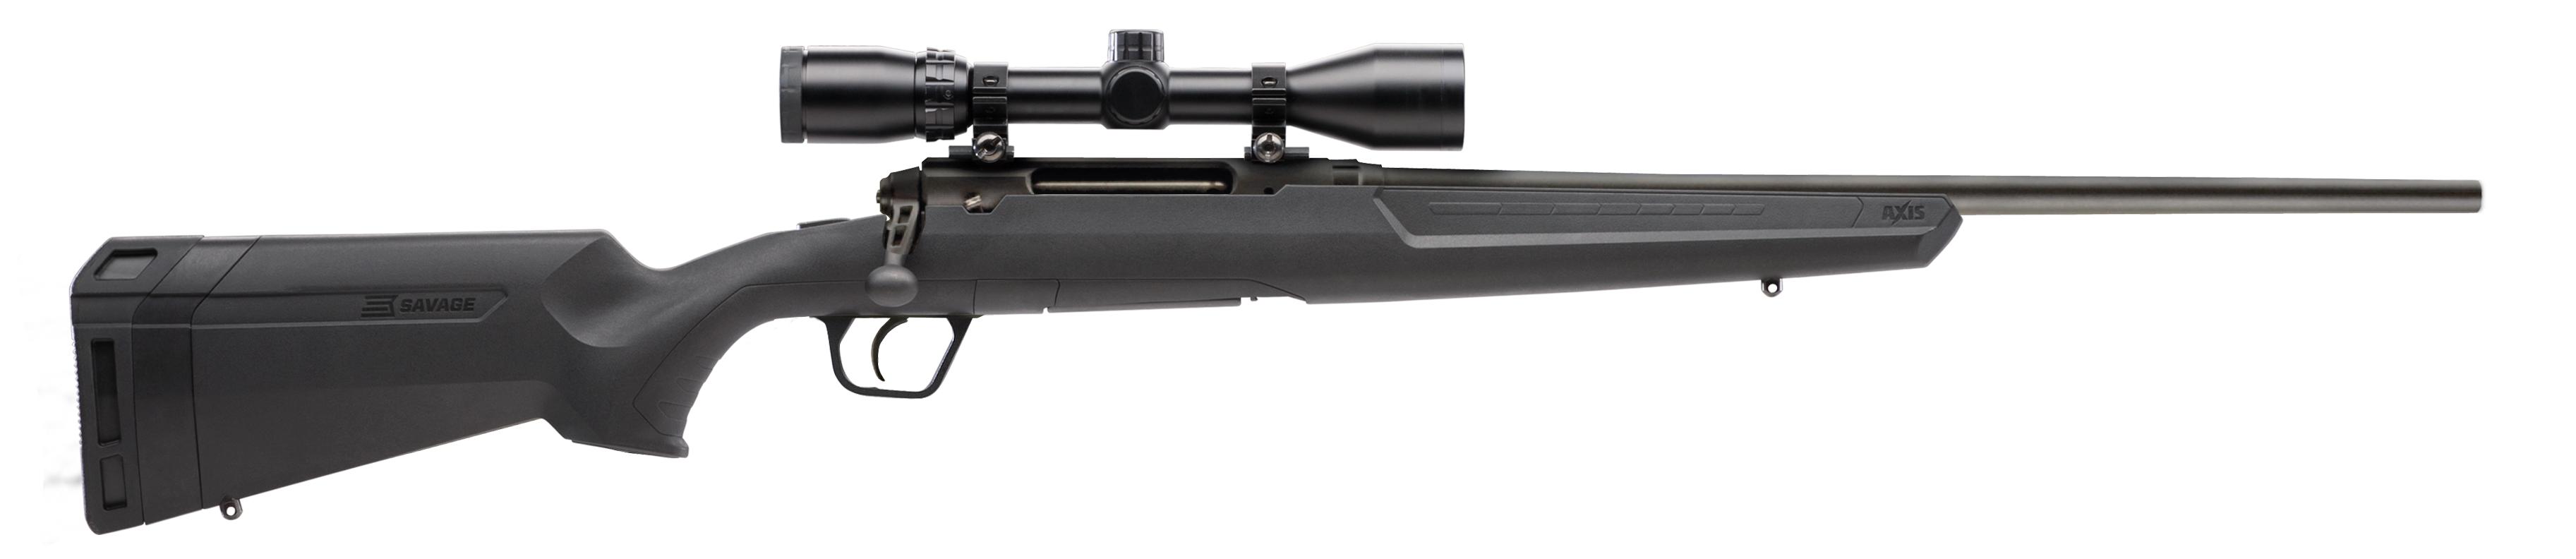 Savage Arms 57266 Axis XP Compact 243 Win 4+1 20